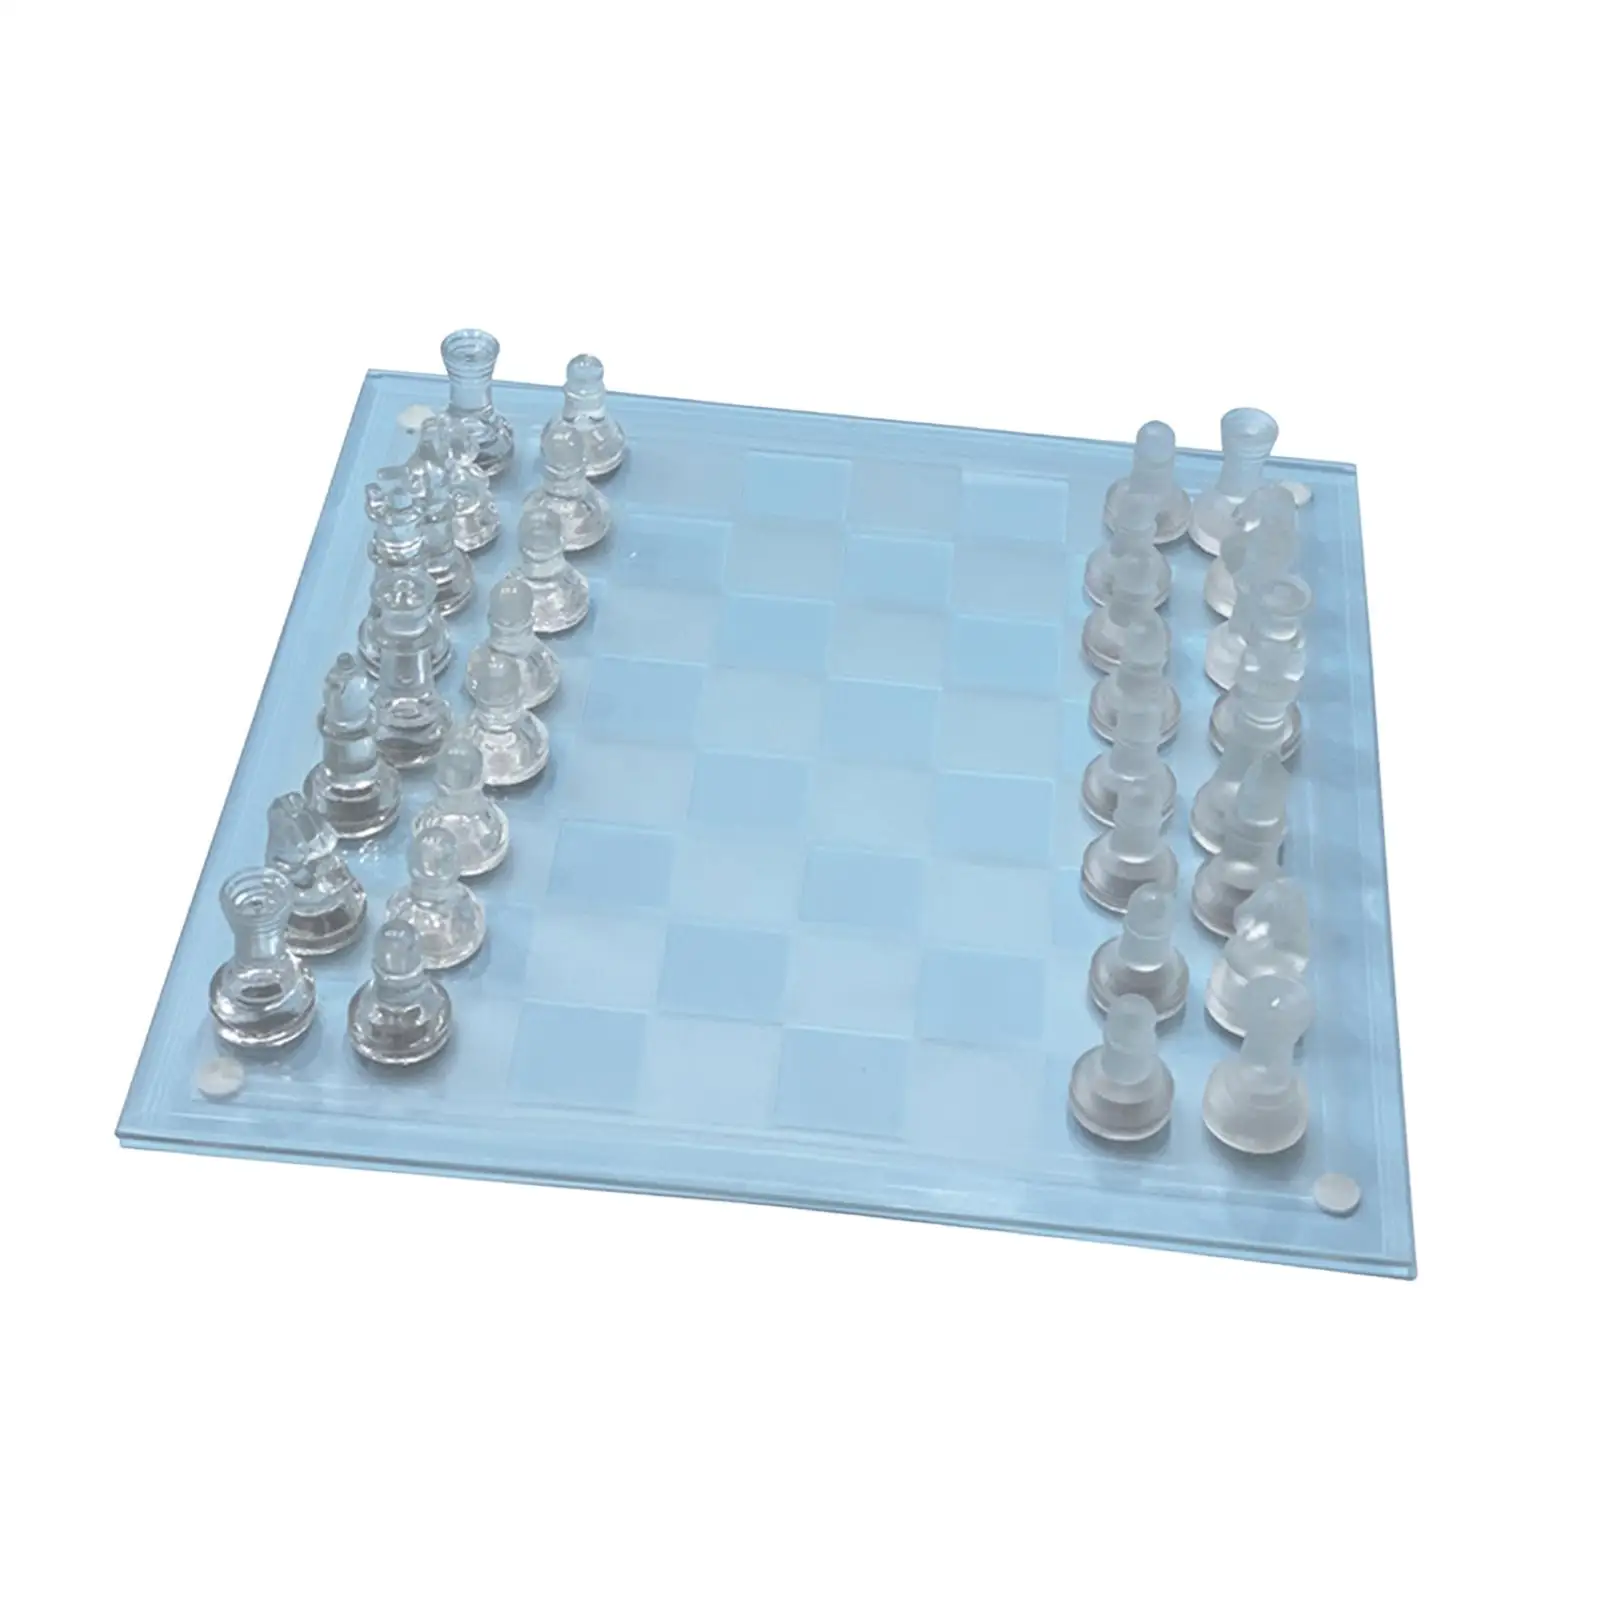 Crystal Chess Board Adults Play Set with Chess Board Table glass Chess Game for Game Interaction Gift Activity Leisure